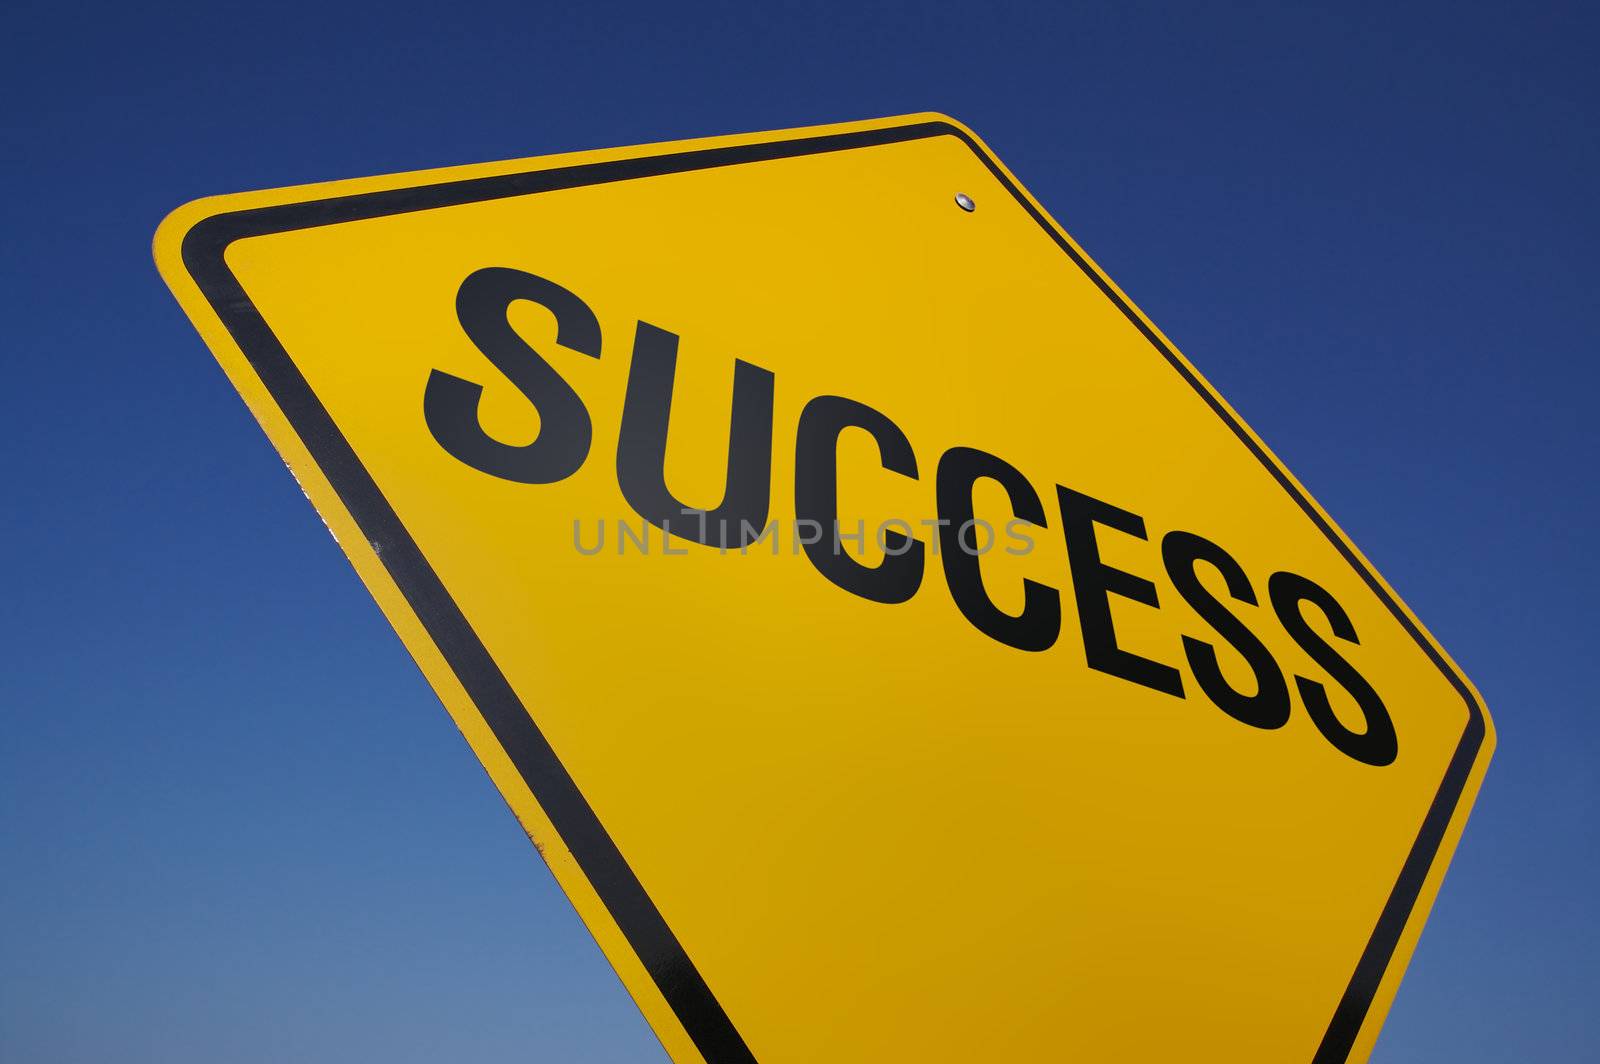 Success Road Sign by Feverpitched